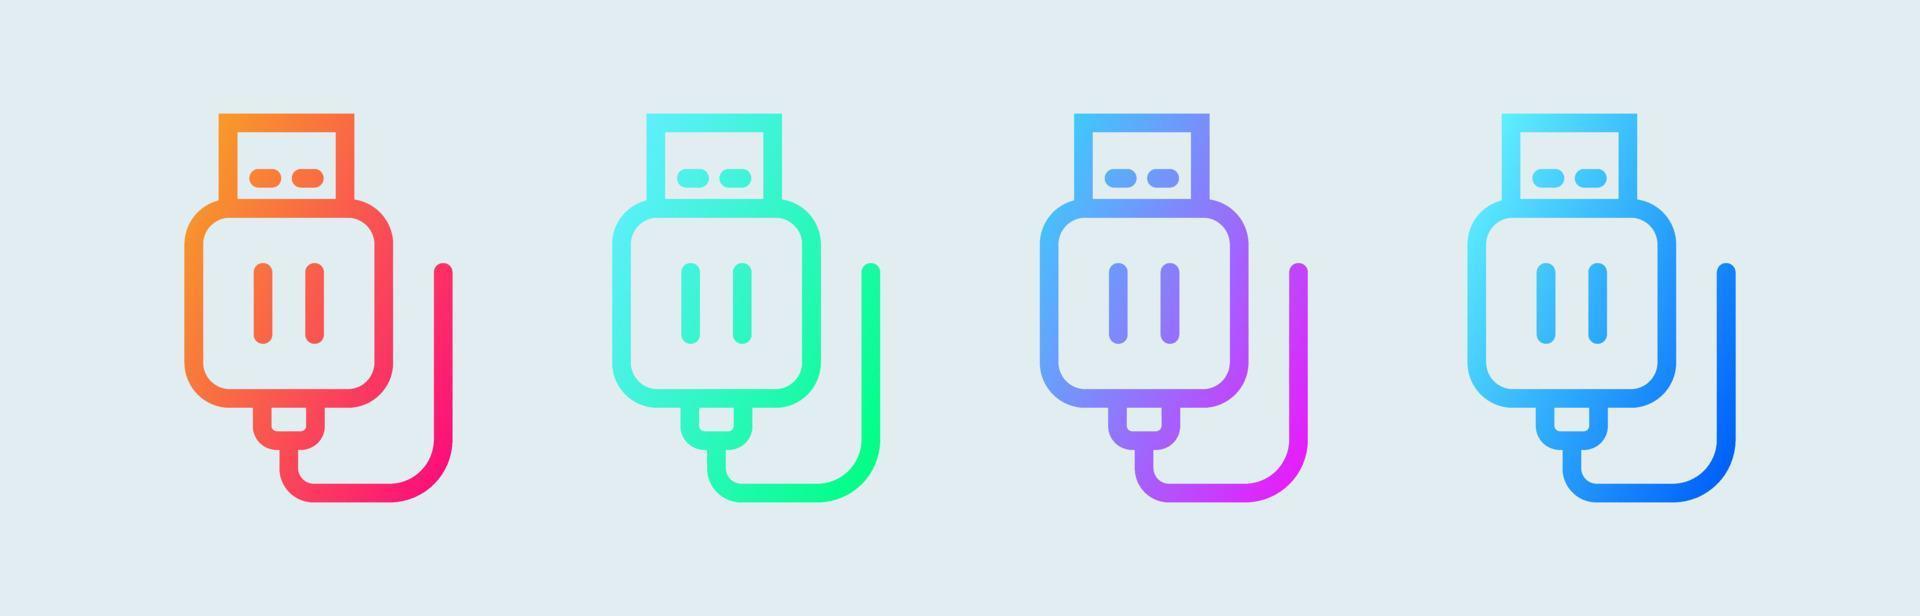 Usb stick line icon in gradient colors. Flash disc signs vector illustration.